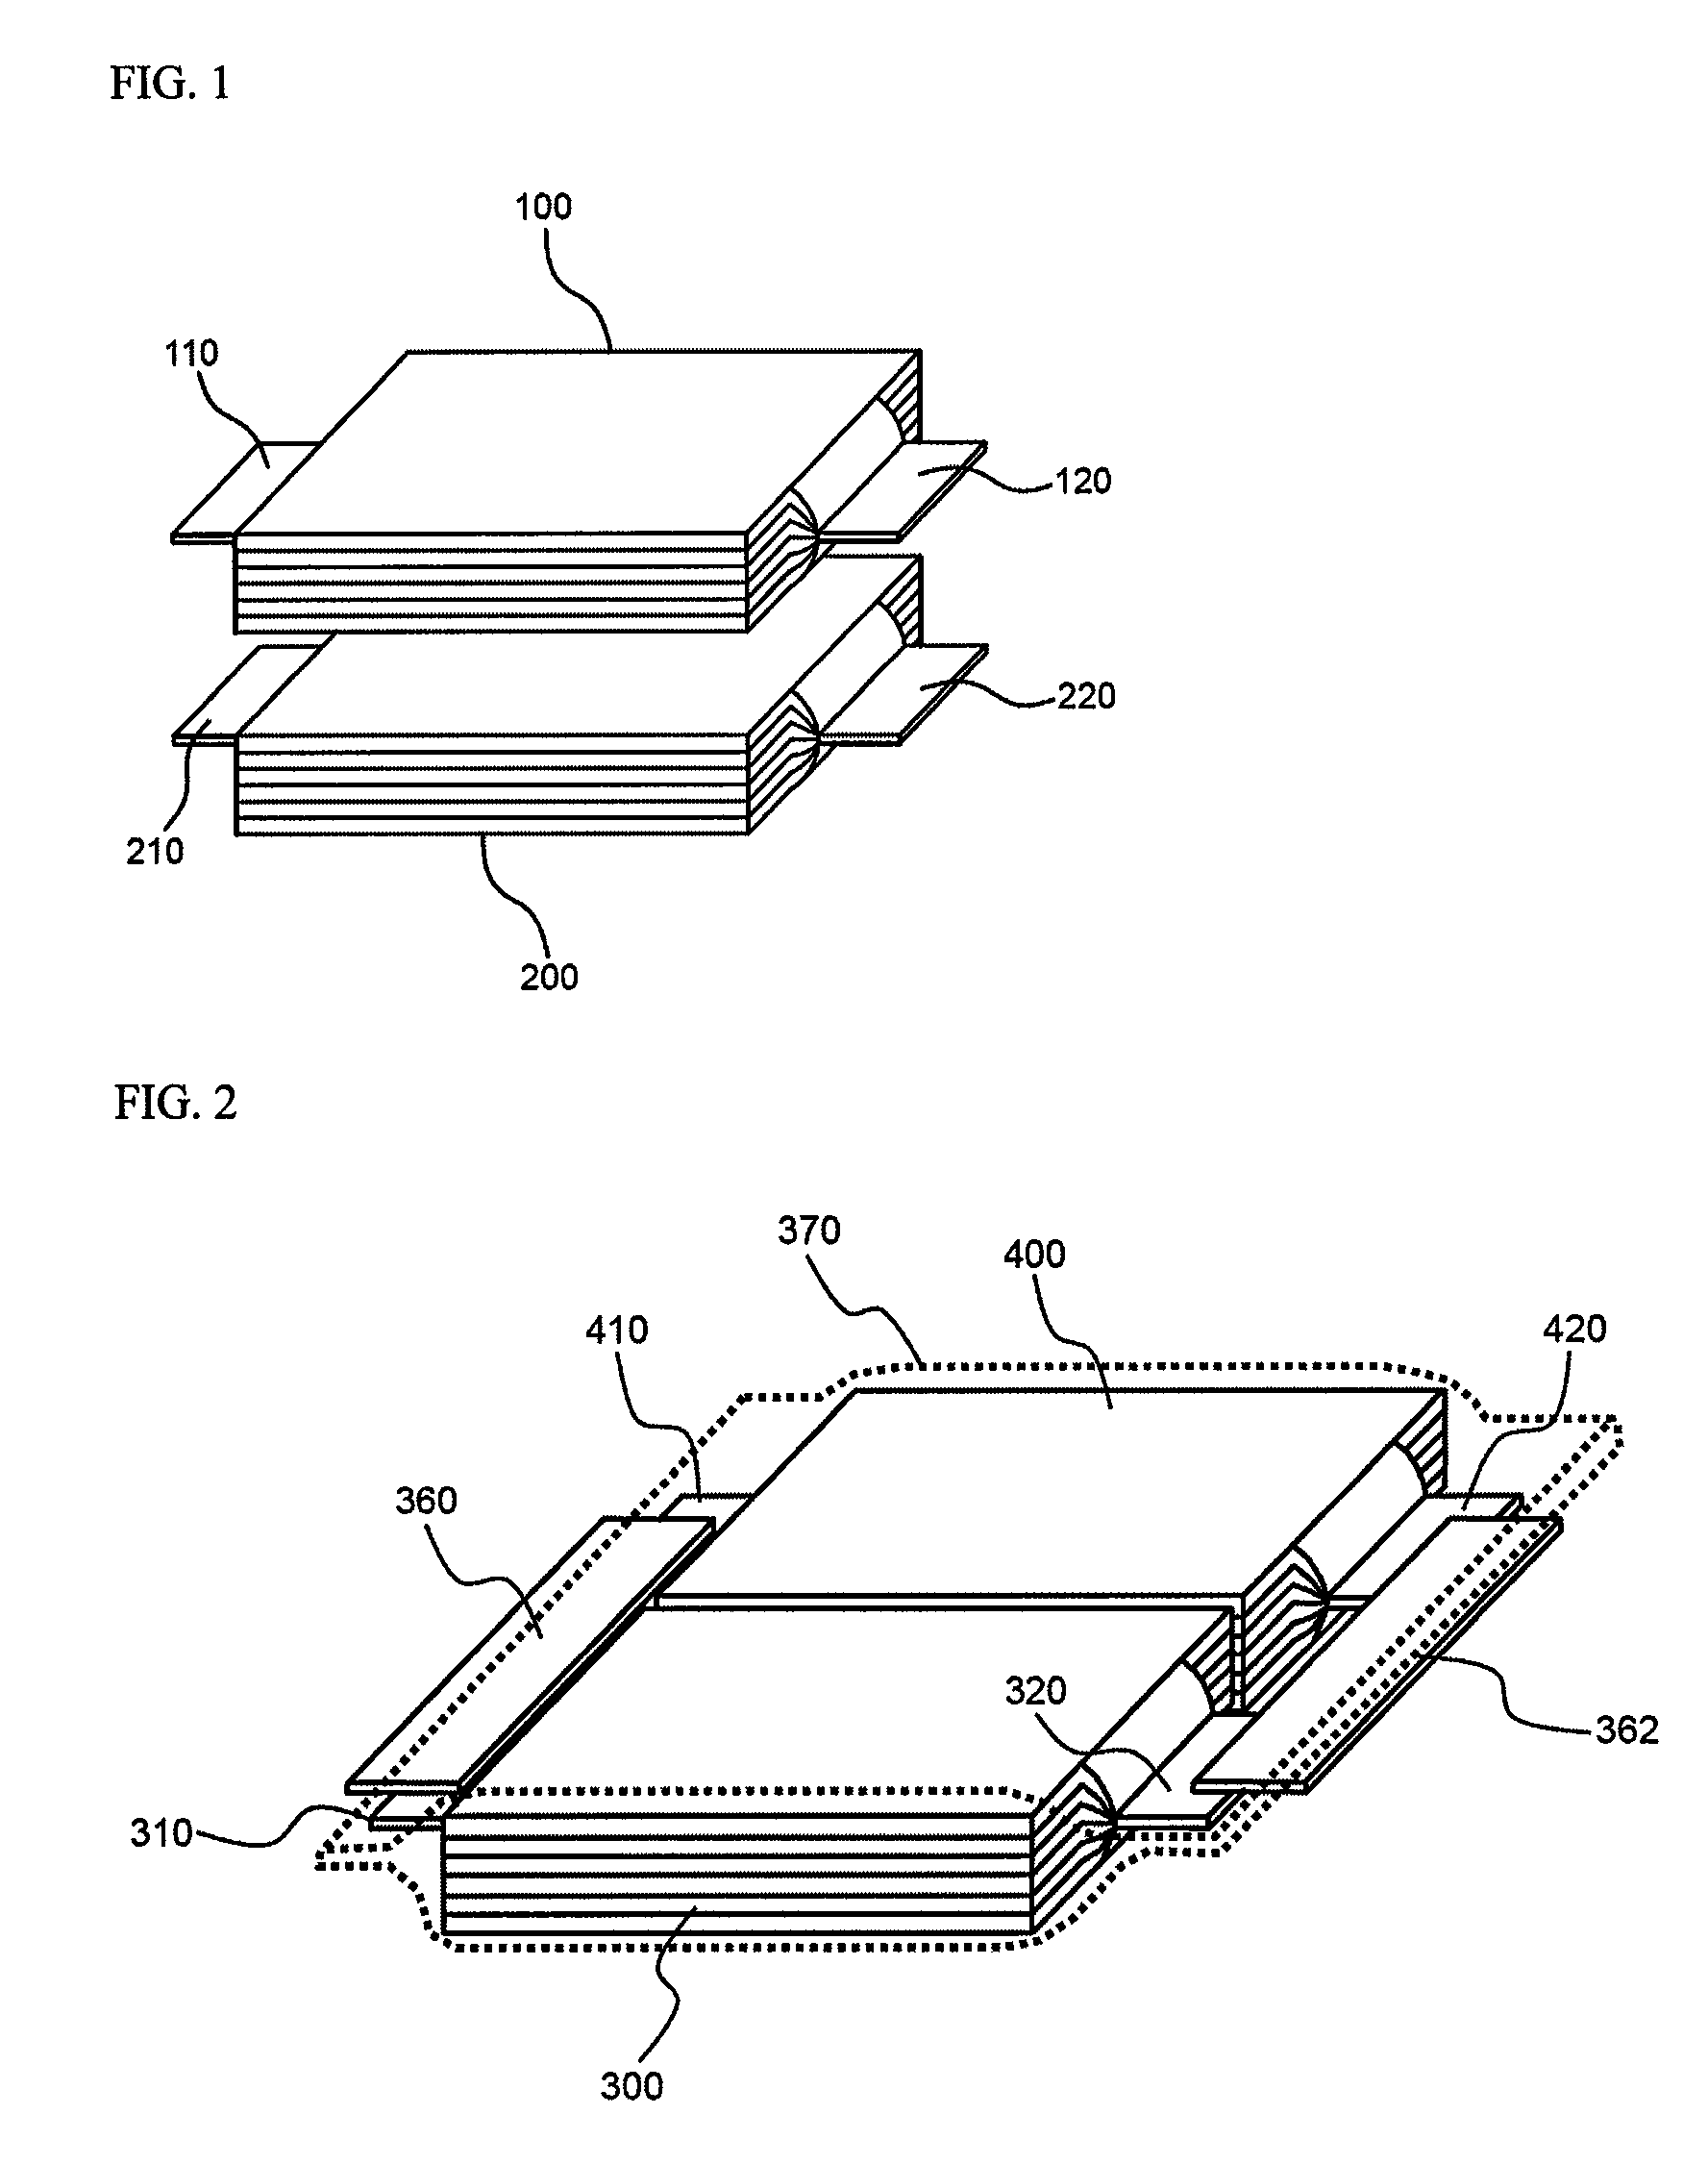 High Capacity Battery Cell Employed with Two or More Unit Cells